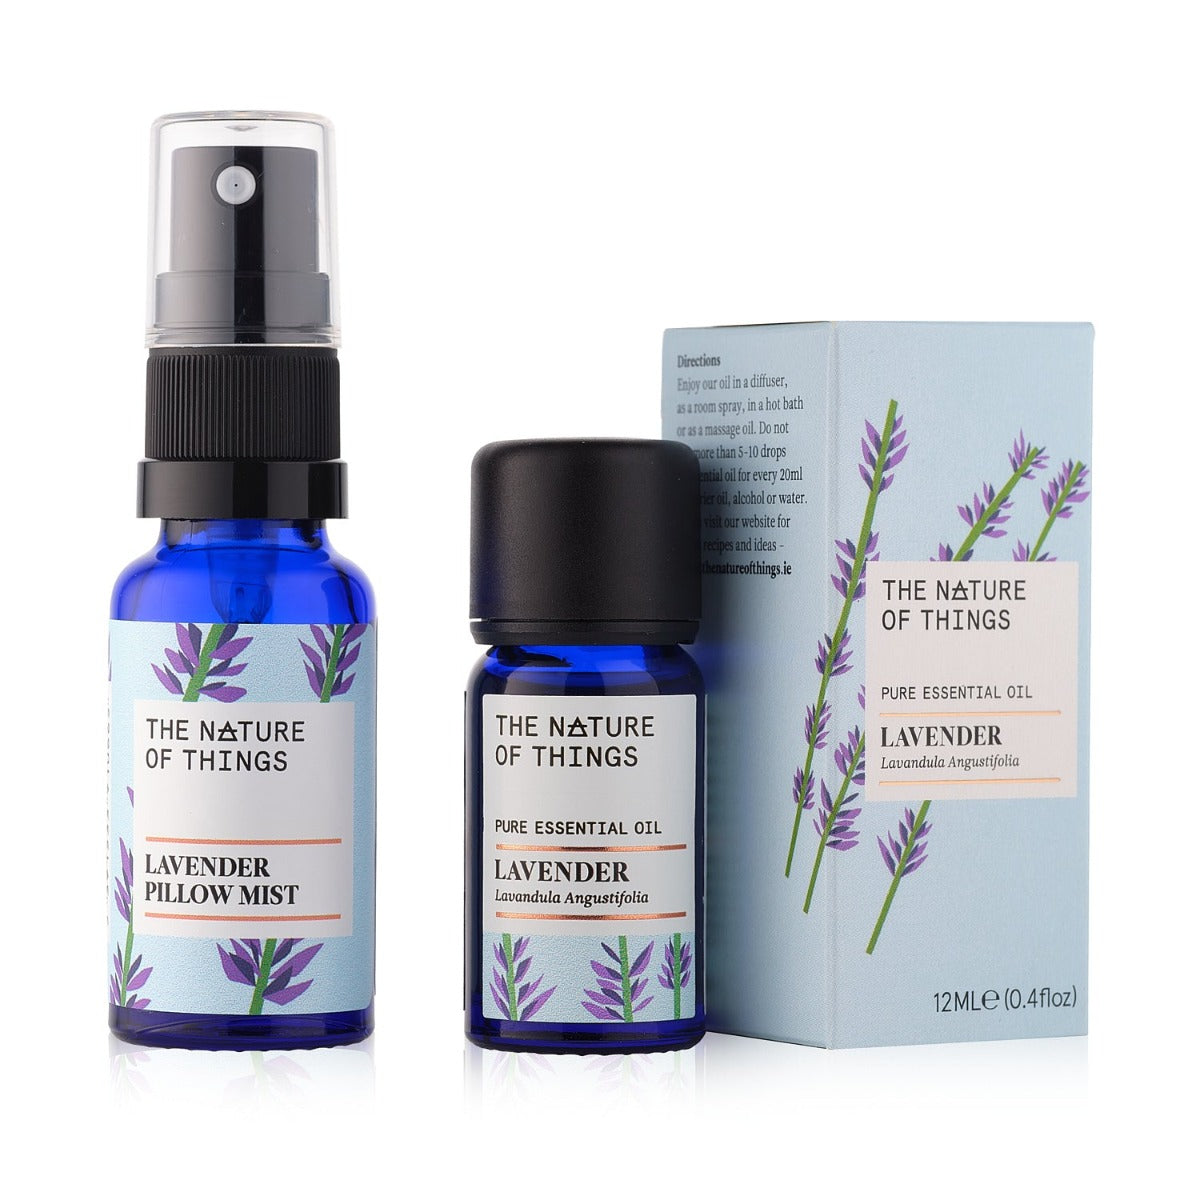 Gift Set - Lavender Pillow Mist from The Nature of Things